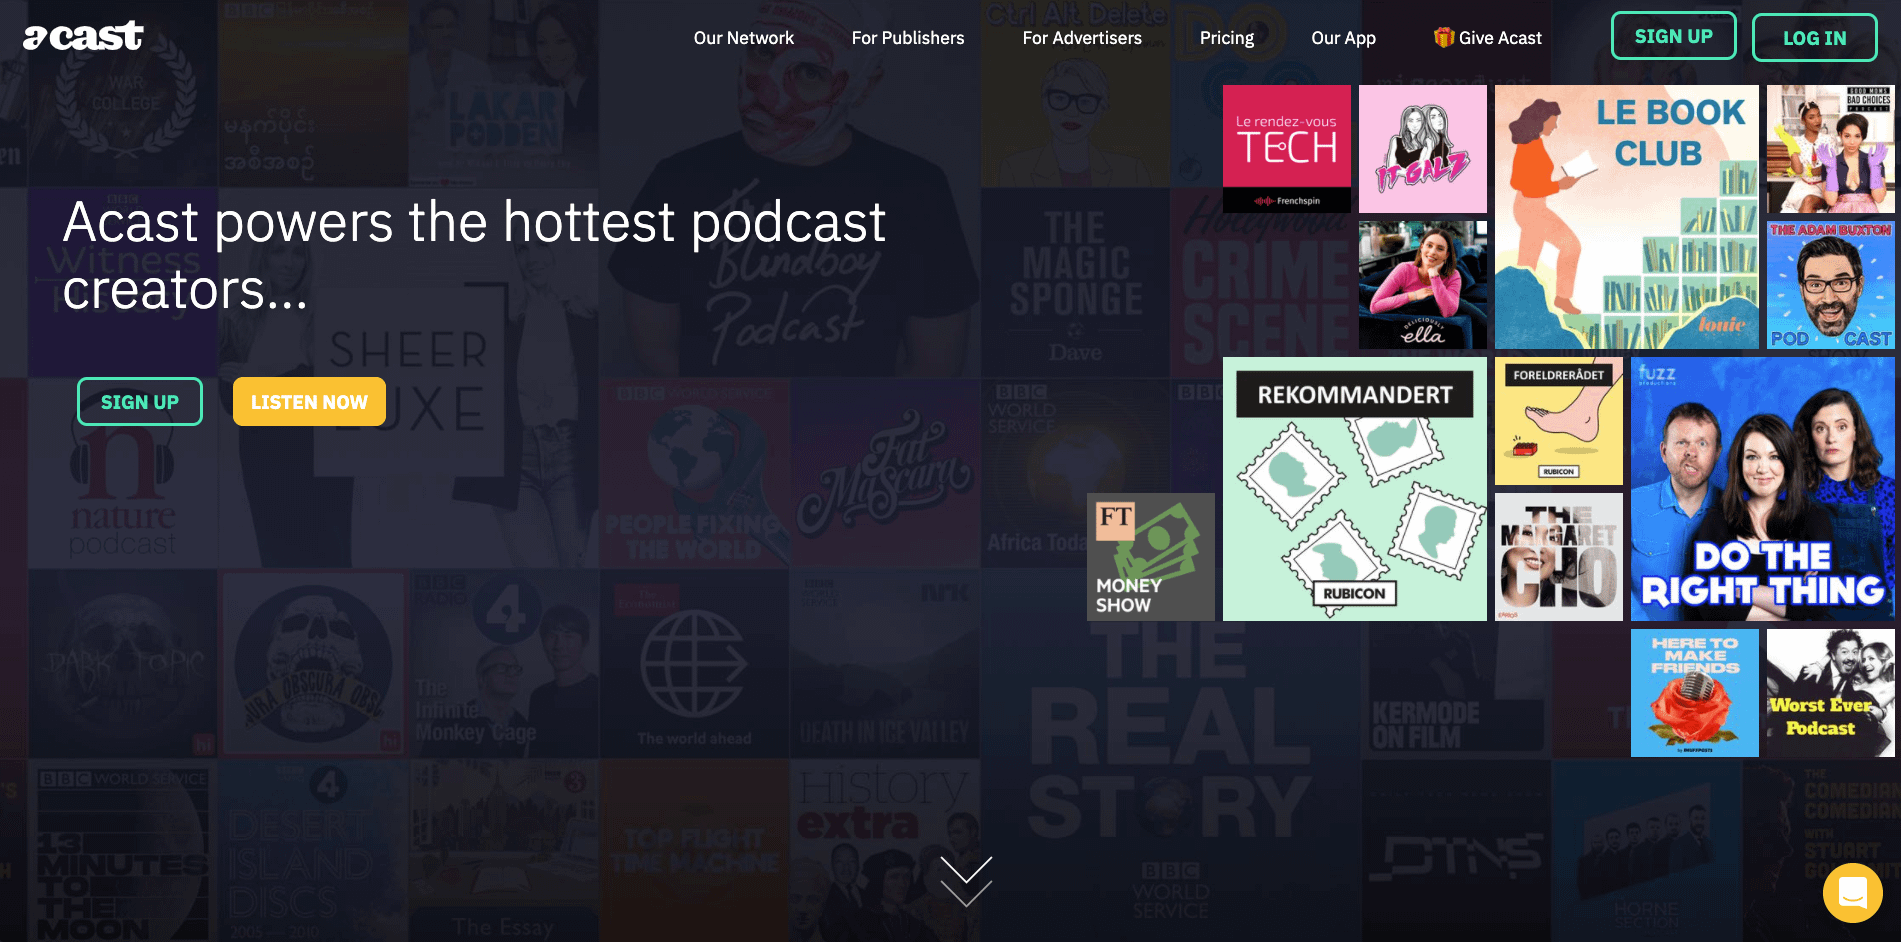 Homepage of Acast, one of the biggest podcast hosts.